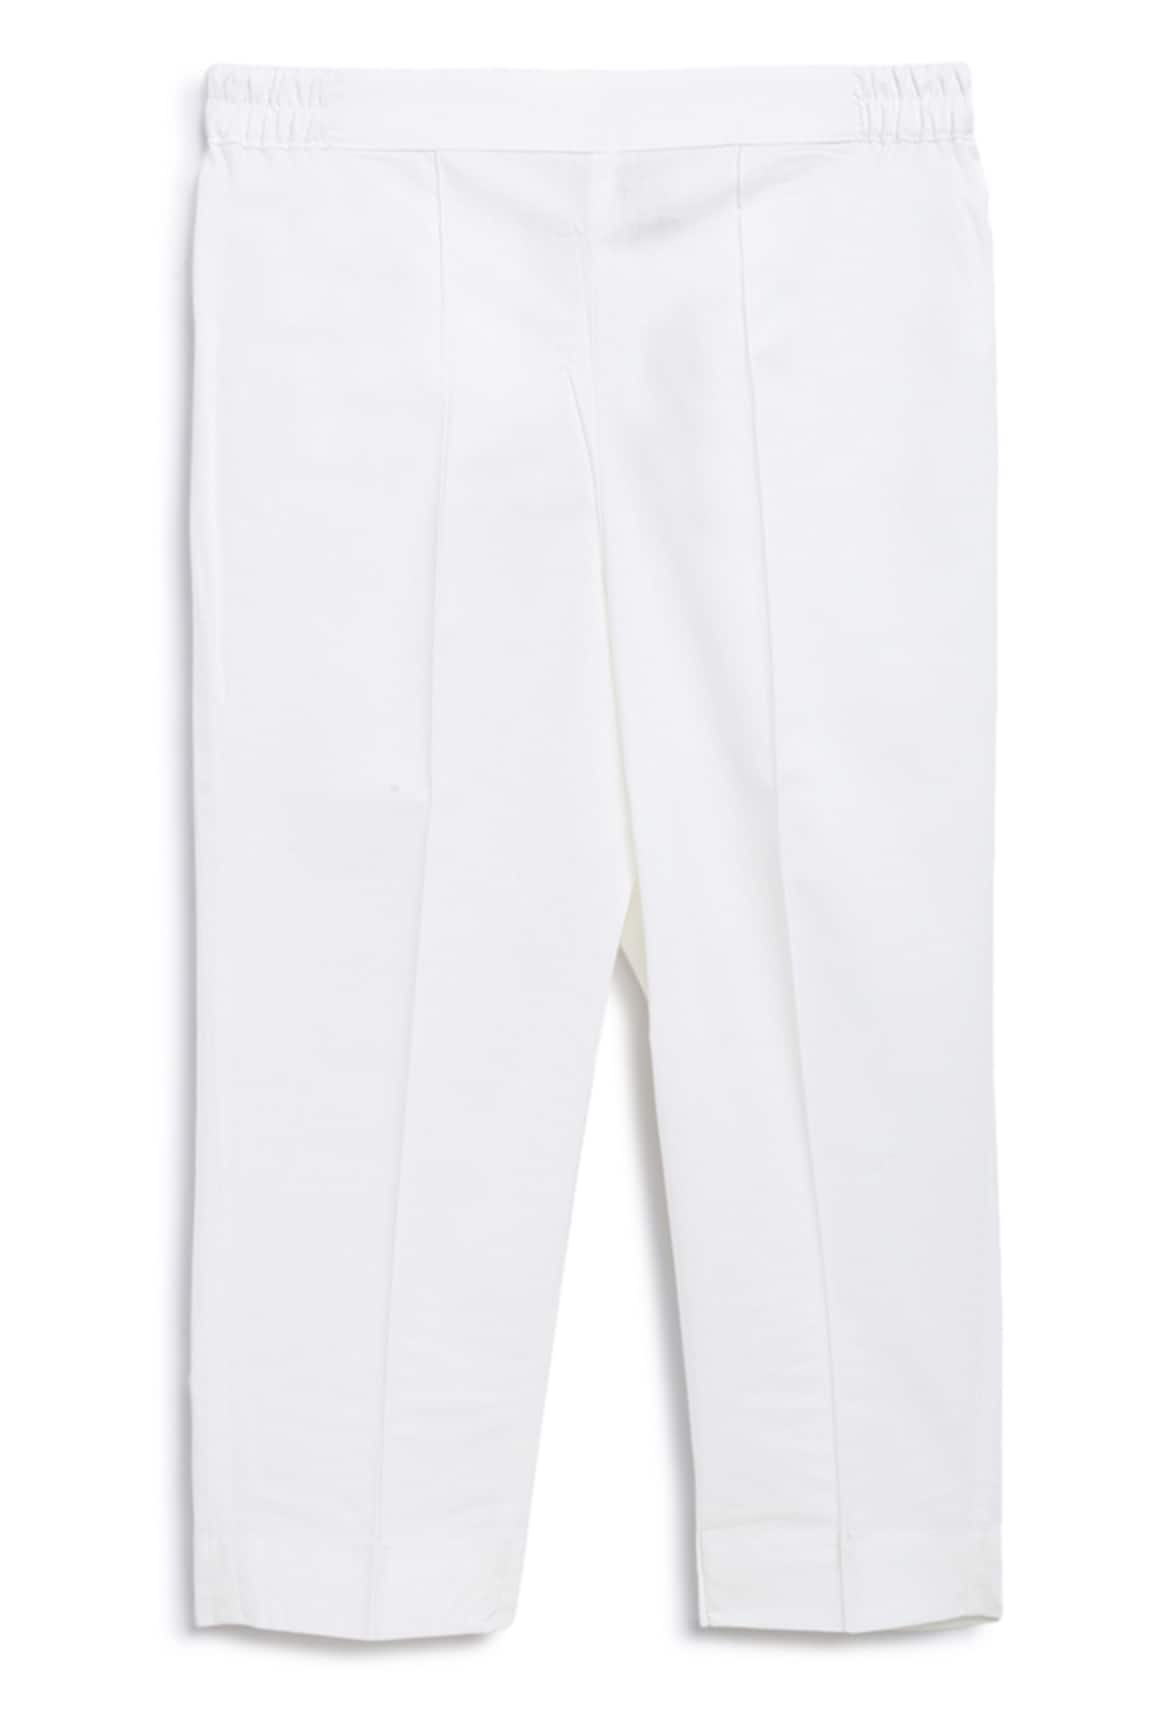 HeadTurners Milky White Trousers Cricket for Mens Boys and Kids  Dazzling  Junior Small  30  Amazonin Clothing  Accessories